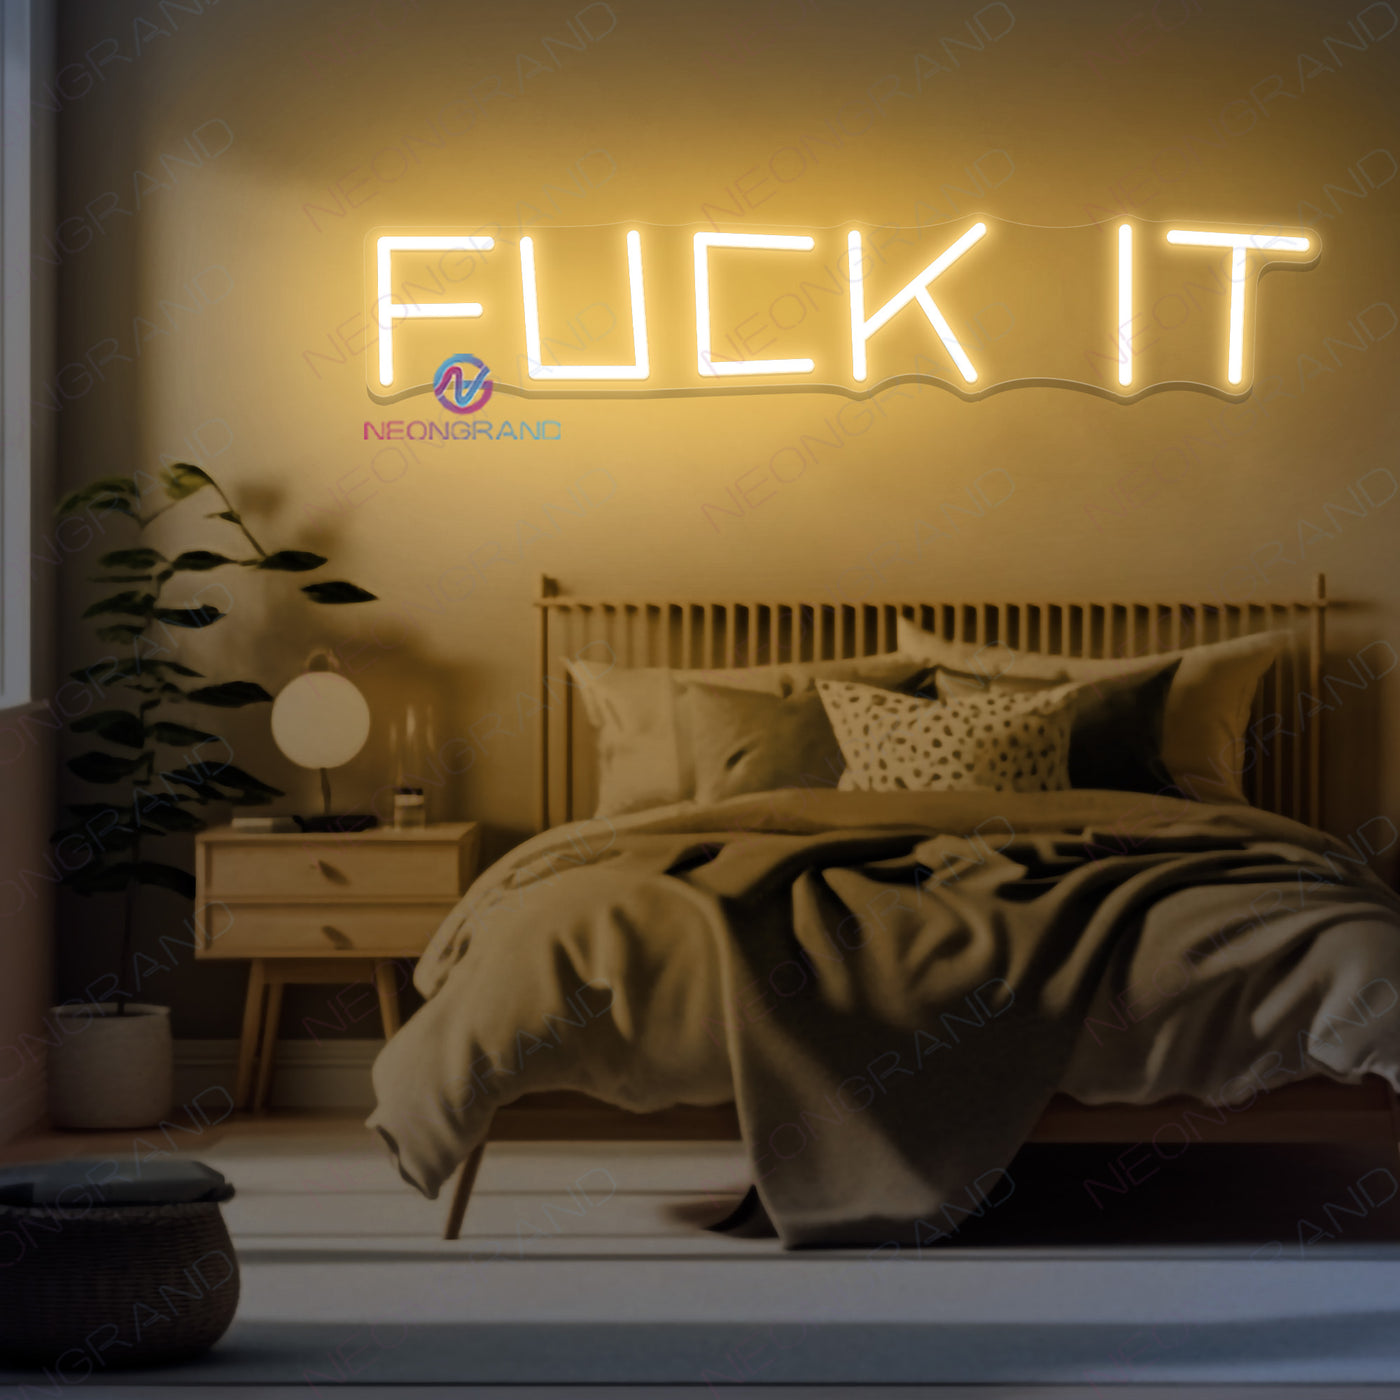 Fuck It Neon Sign Led Light Man Cave Neon Signs light yellow